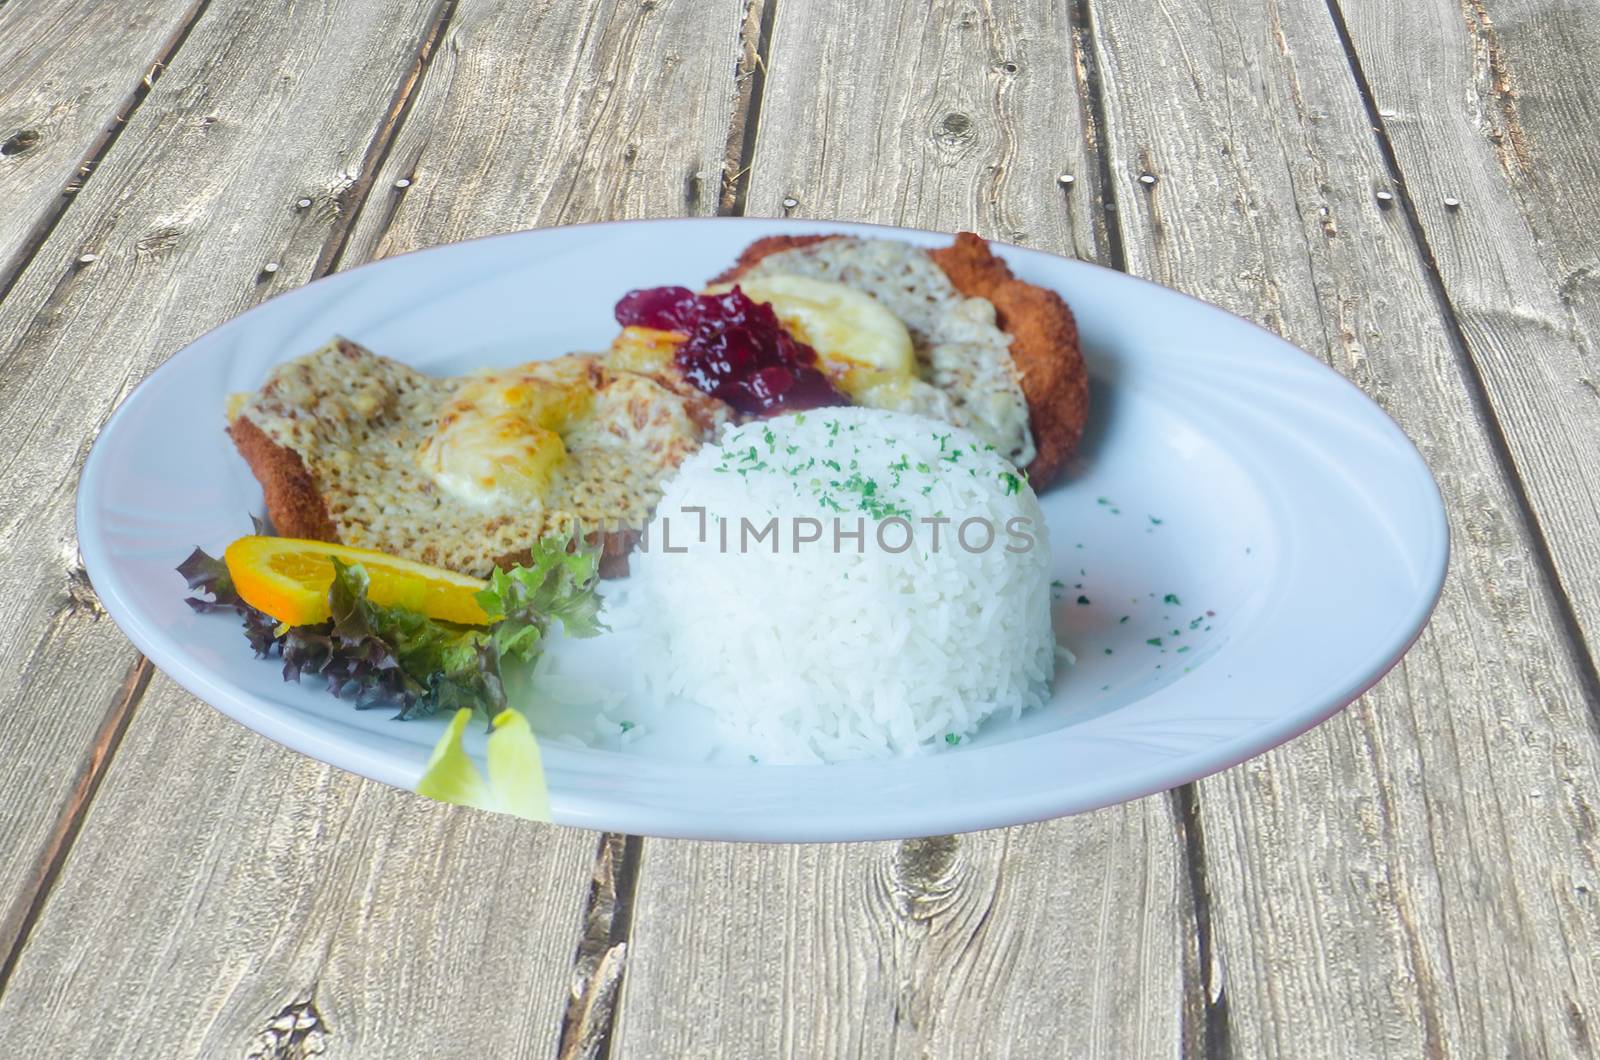 Cutlet unbreaded with pineapple slices with salad and rice also called Hawaii escalope.